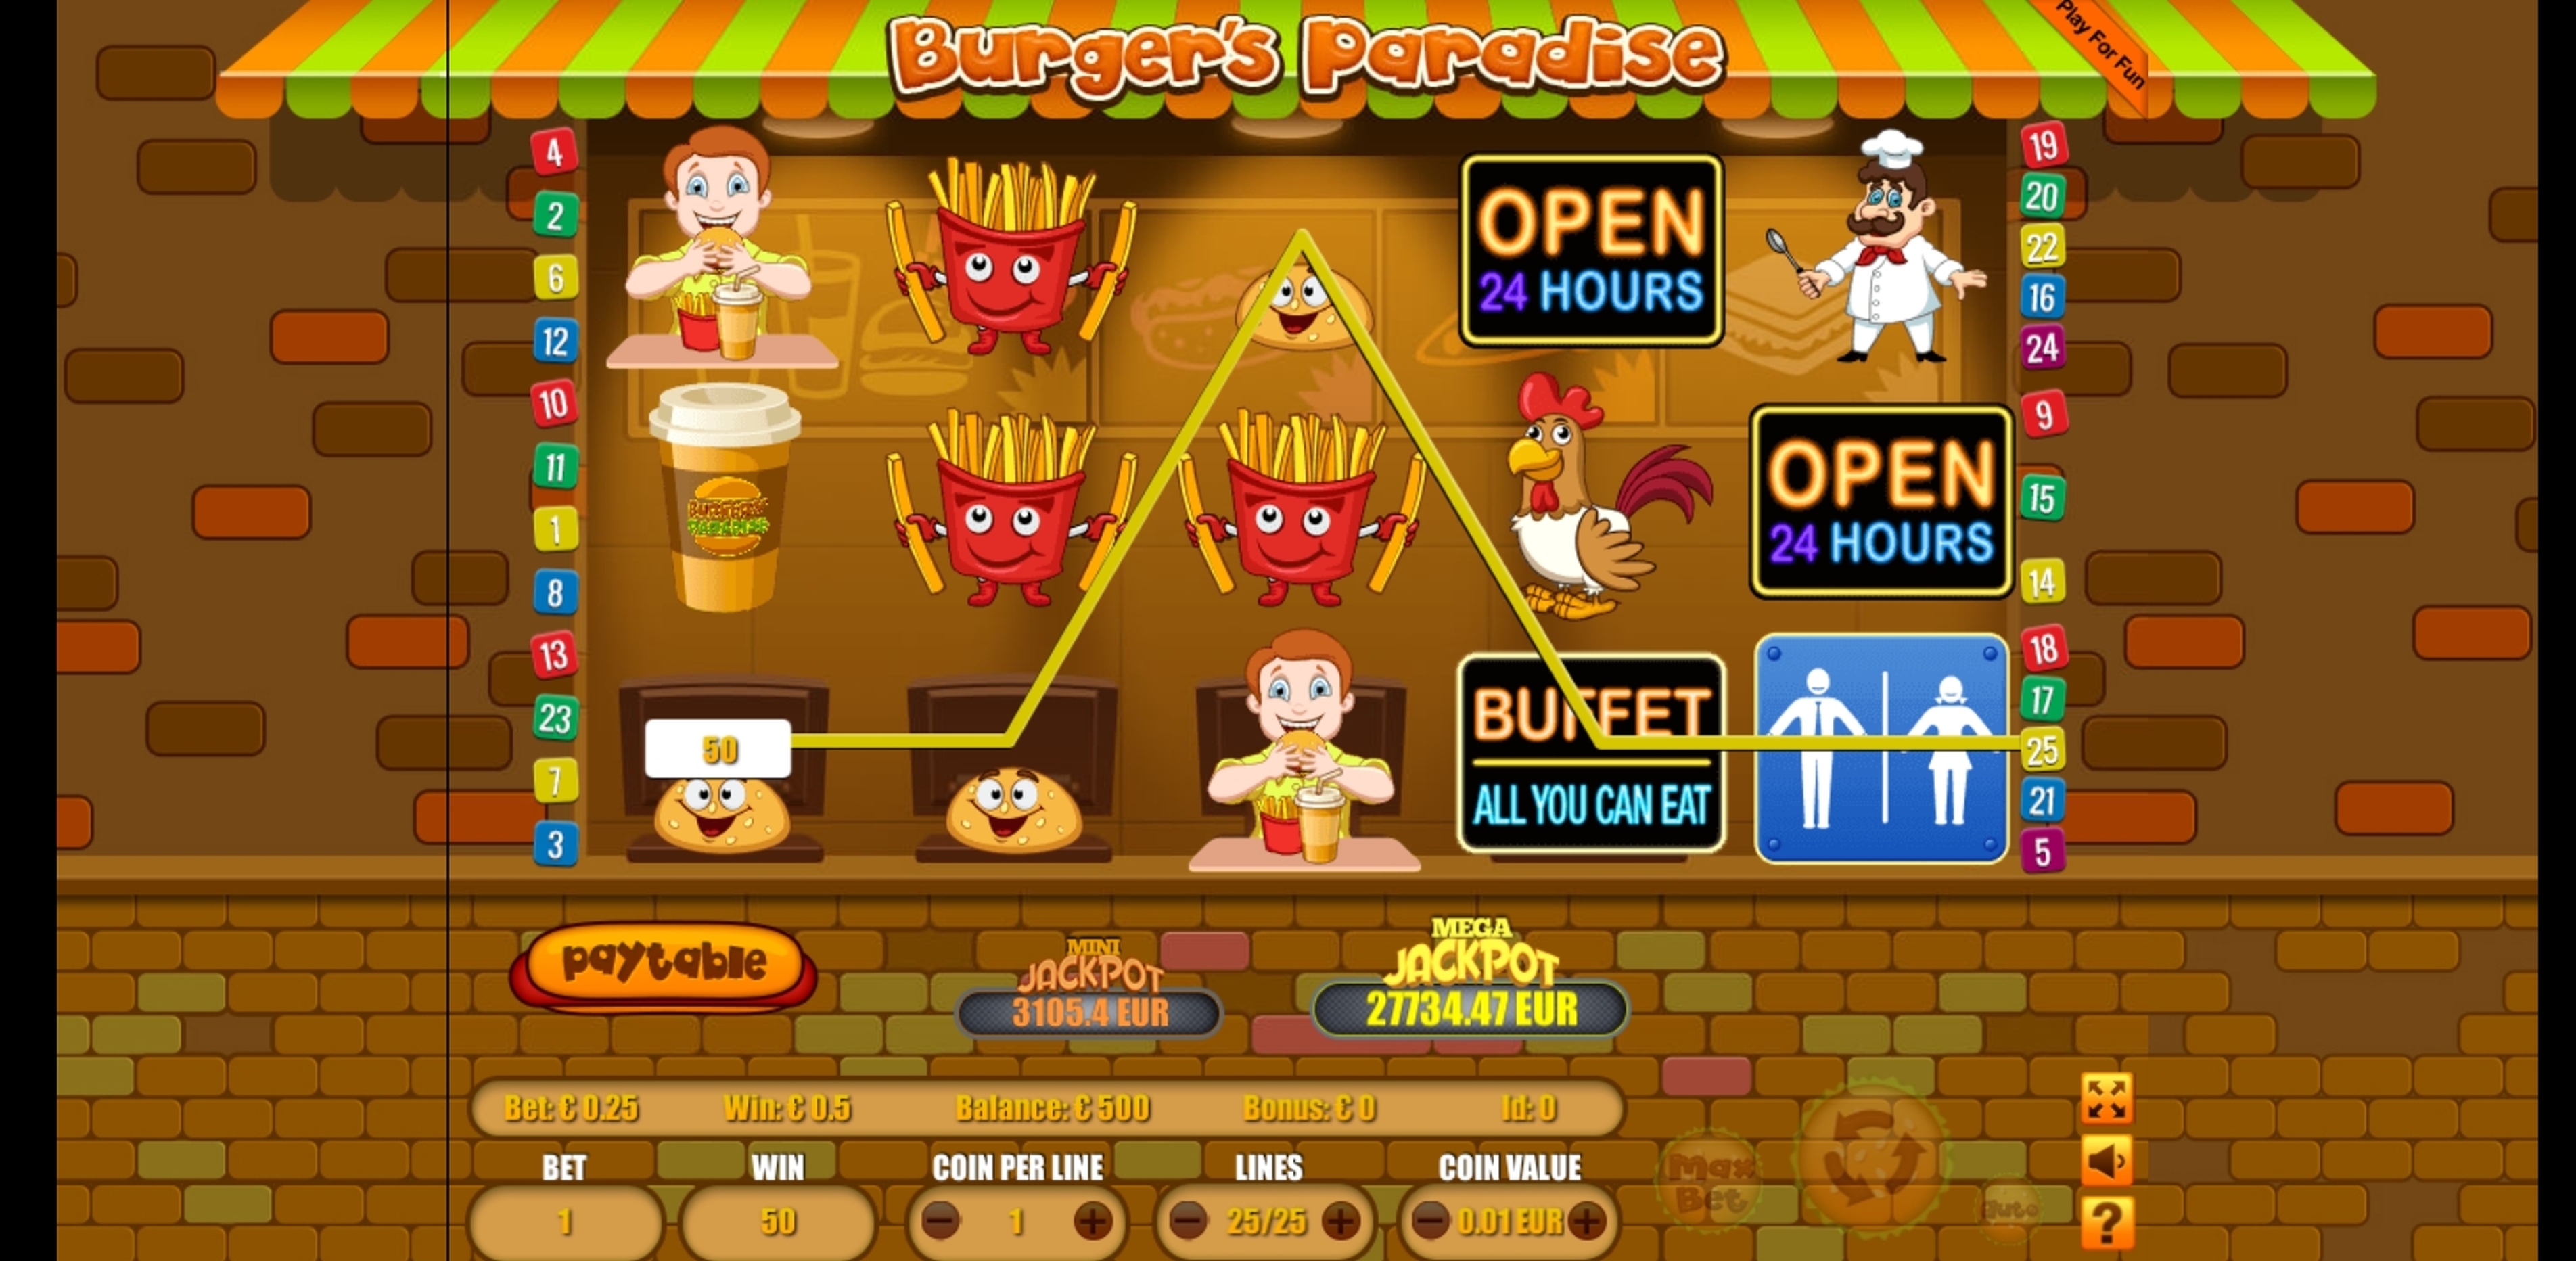 Win Money in Burgers Paradise Free Slot Game by Portomaso Gaming